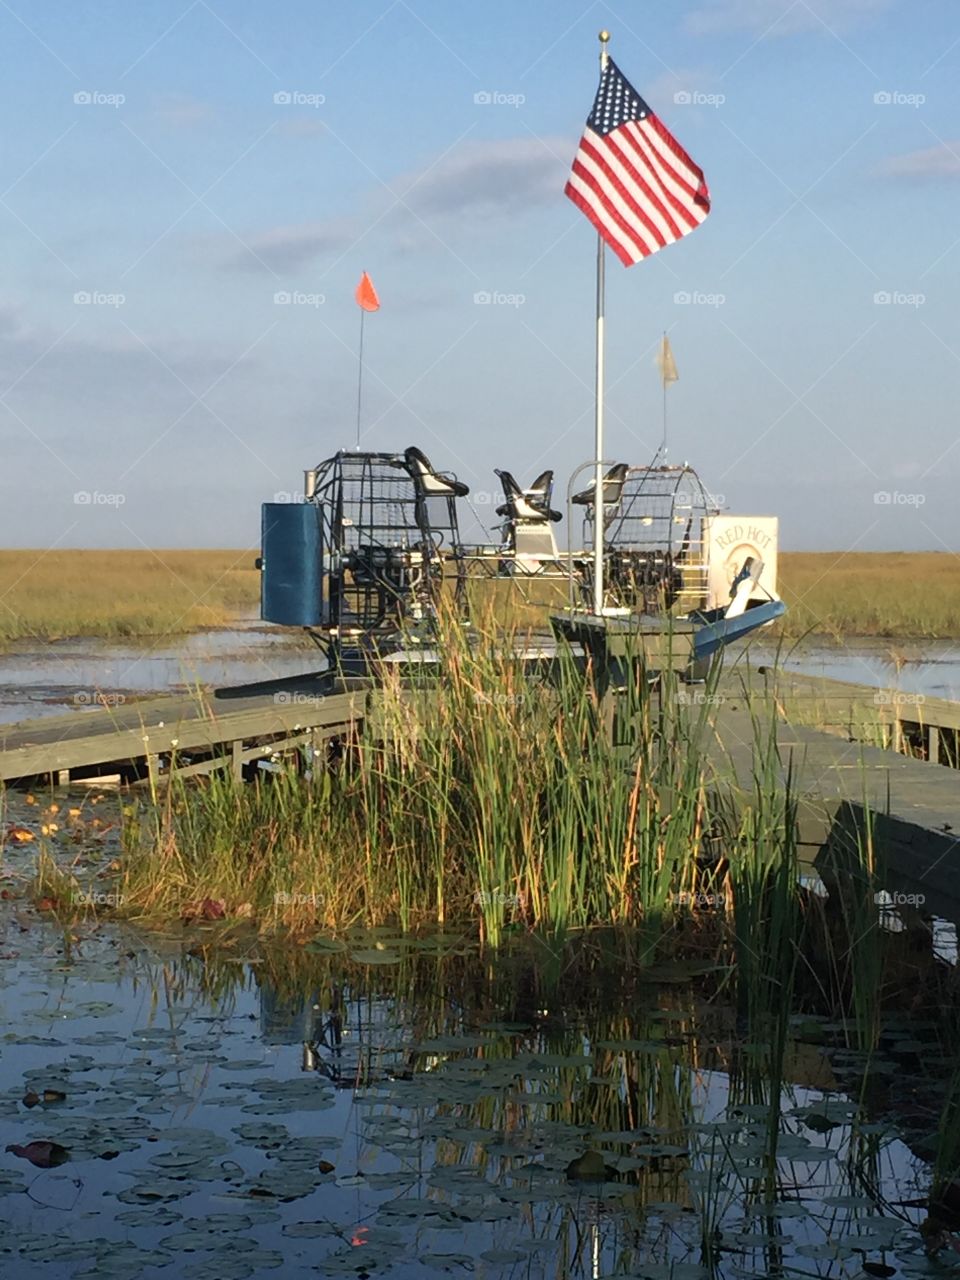 Only 2 ways in airboat or bird